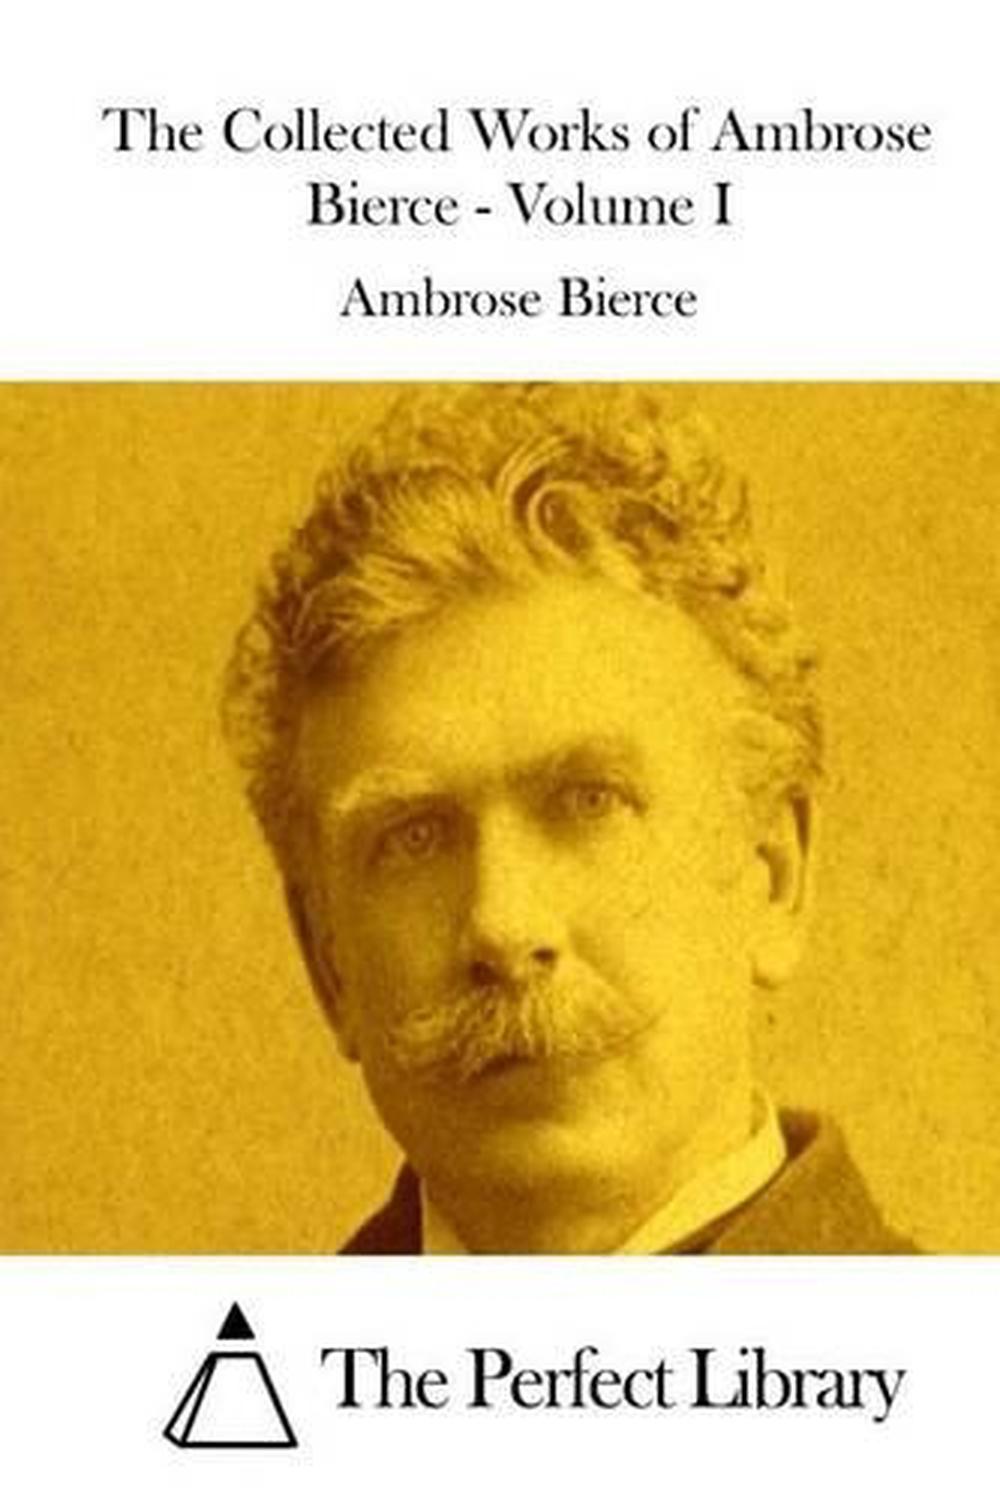 The Collected Works of Ambrose Bierce - Volume I by Ambrose Bierce ...